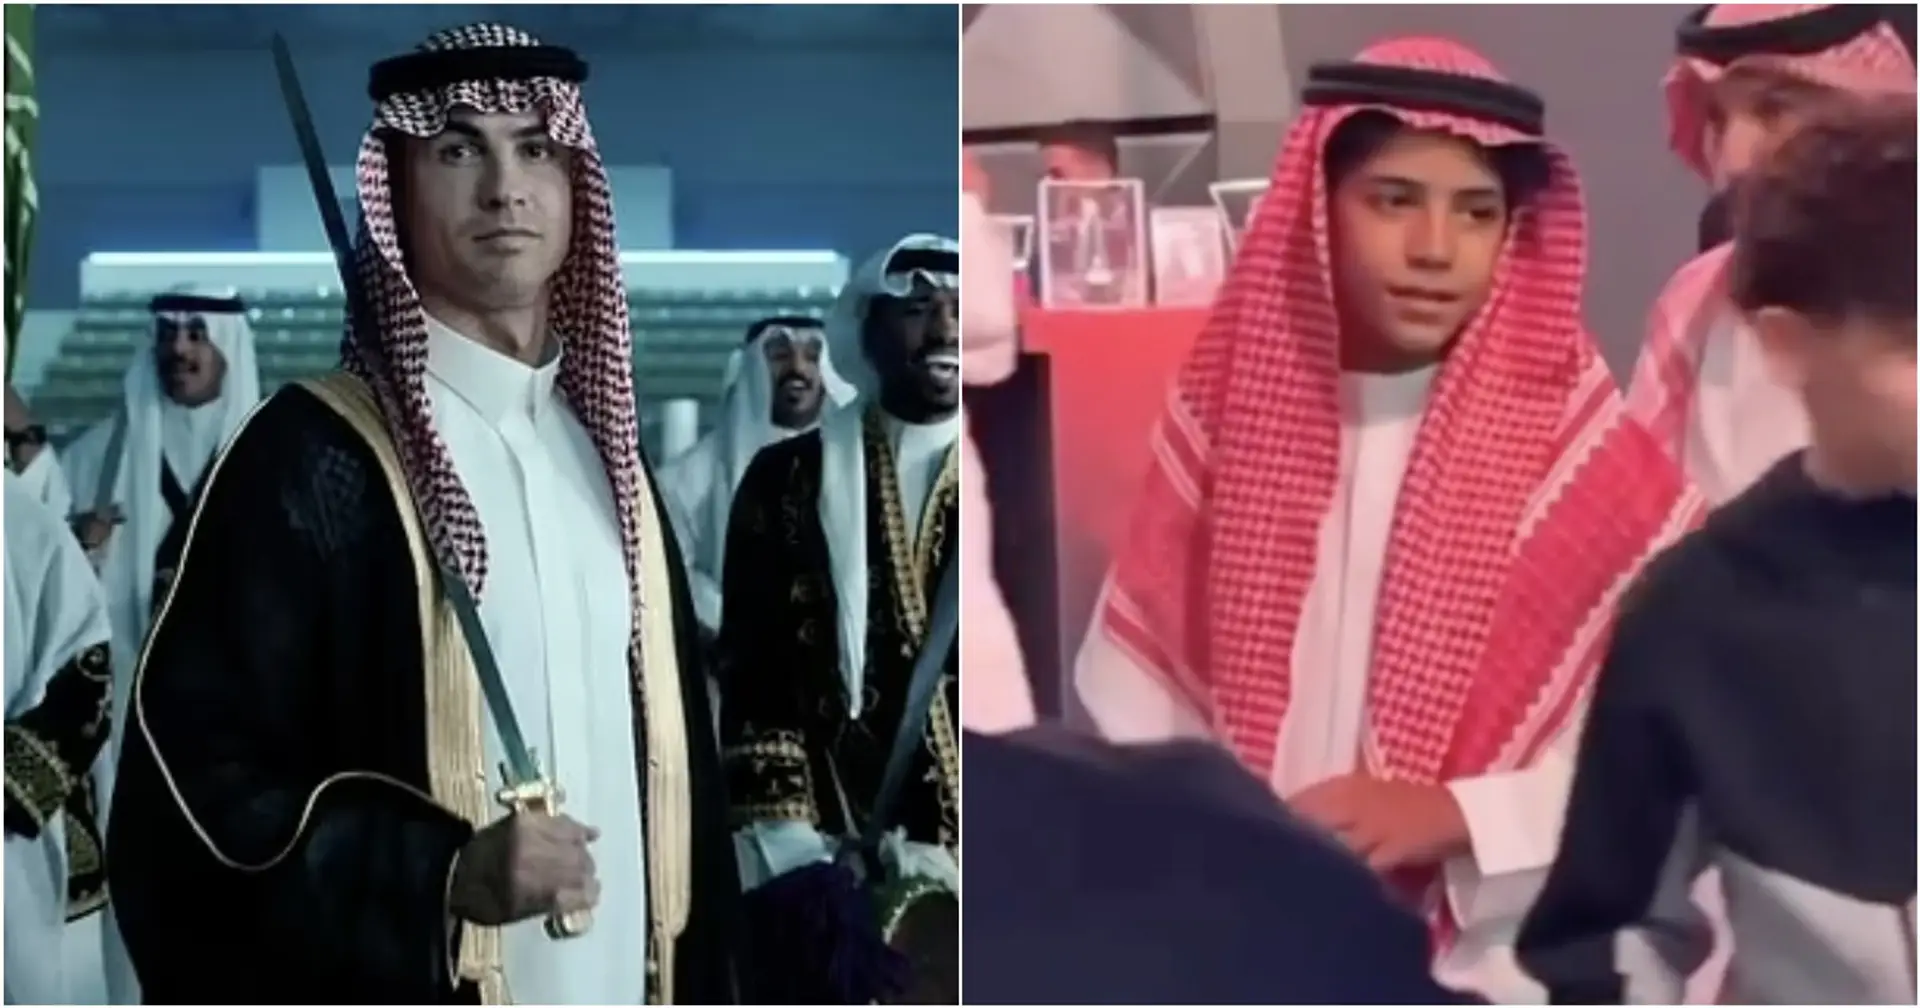 Like father, like son: Cristiano Jr embraces Saudi culture by wearing traditional clothes